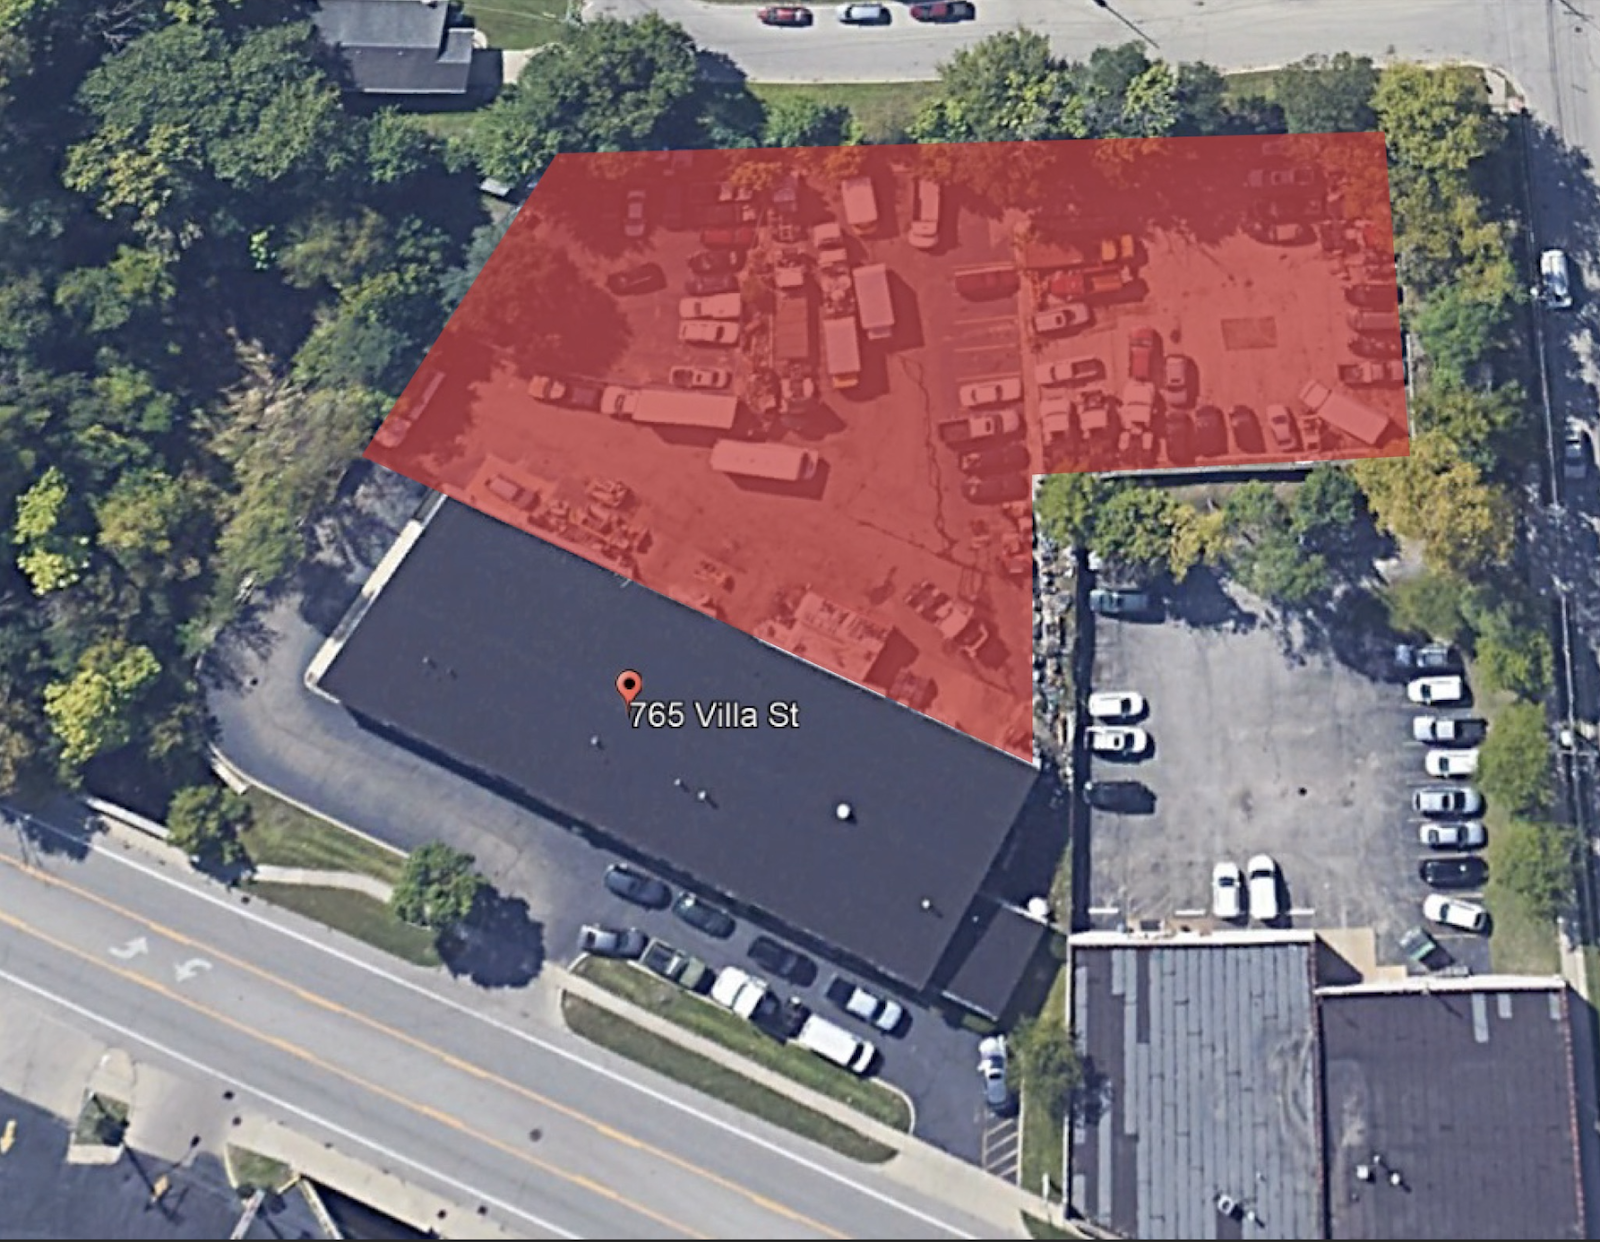 GC Realty & Development Commercial Property Of The Week - 765 Villa St